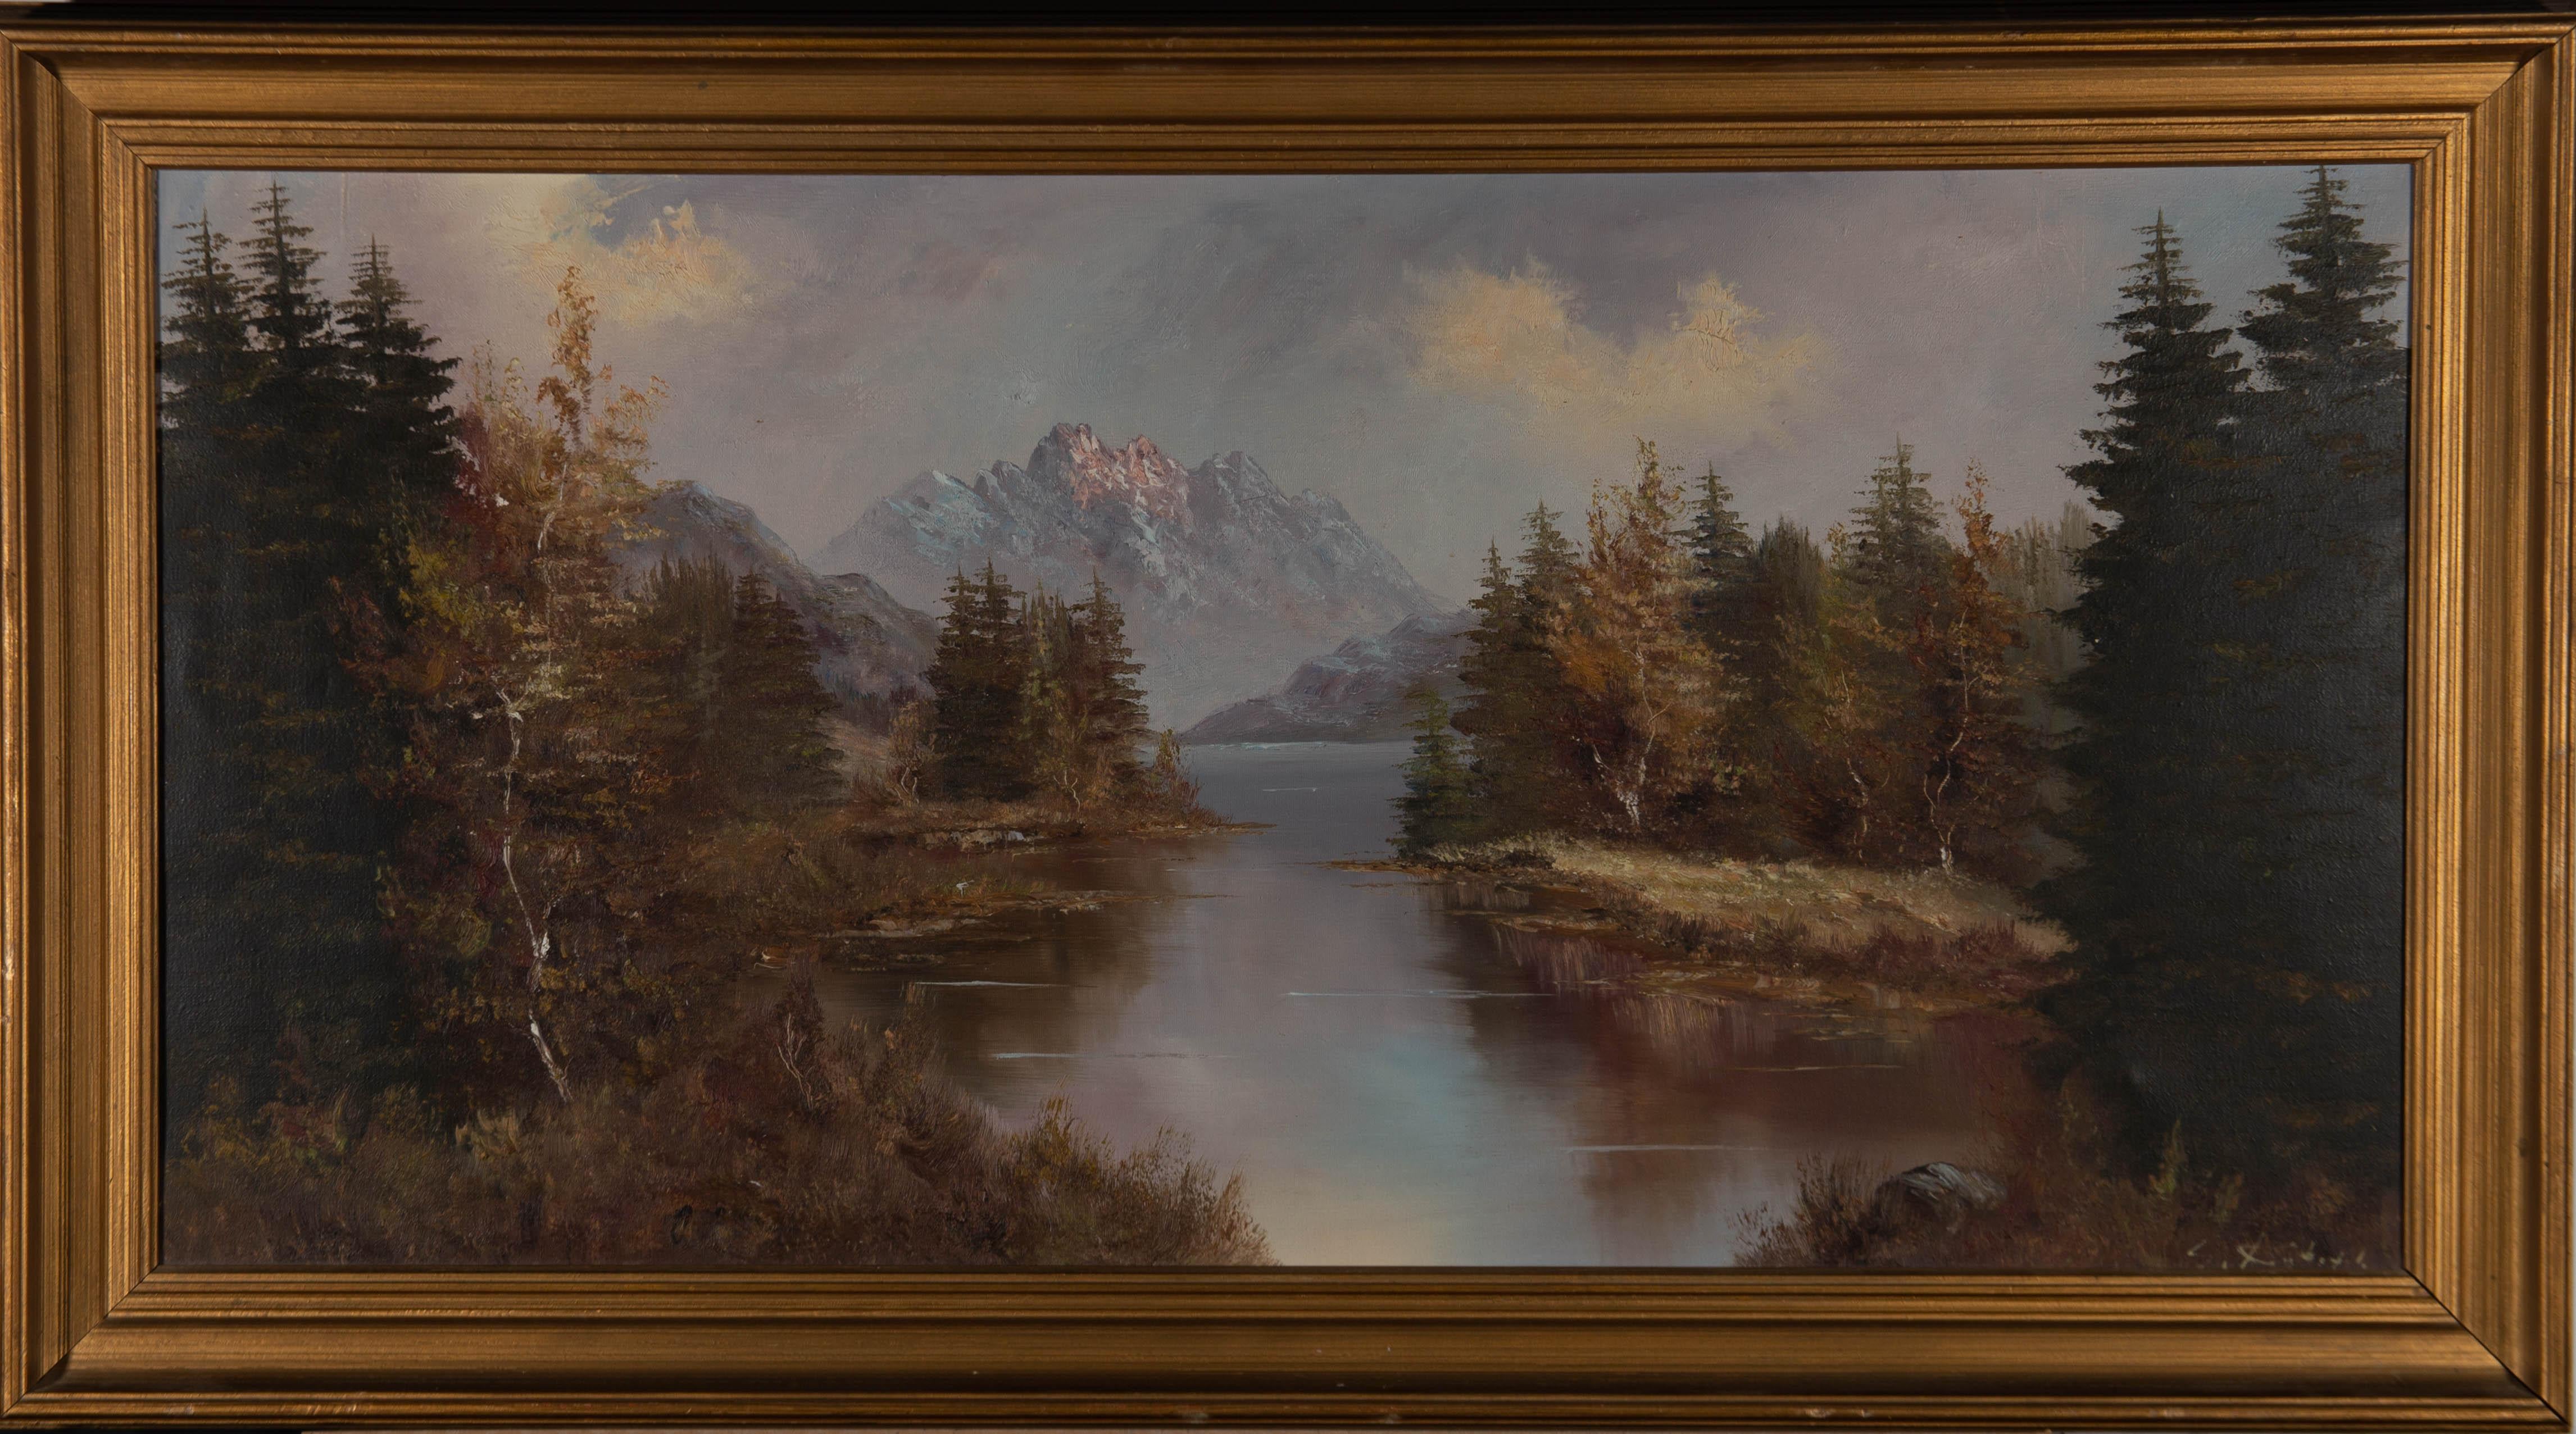 Contemporary Oil - Mountain Lake - Painting by Unknown